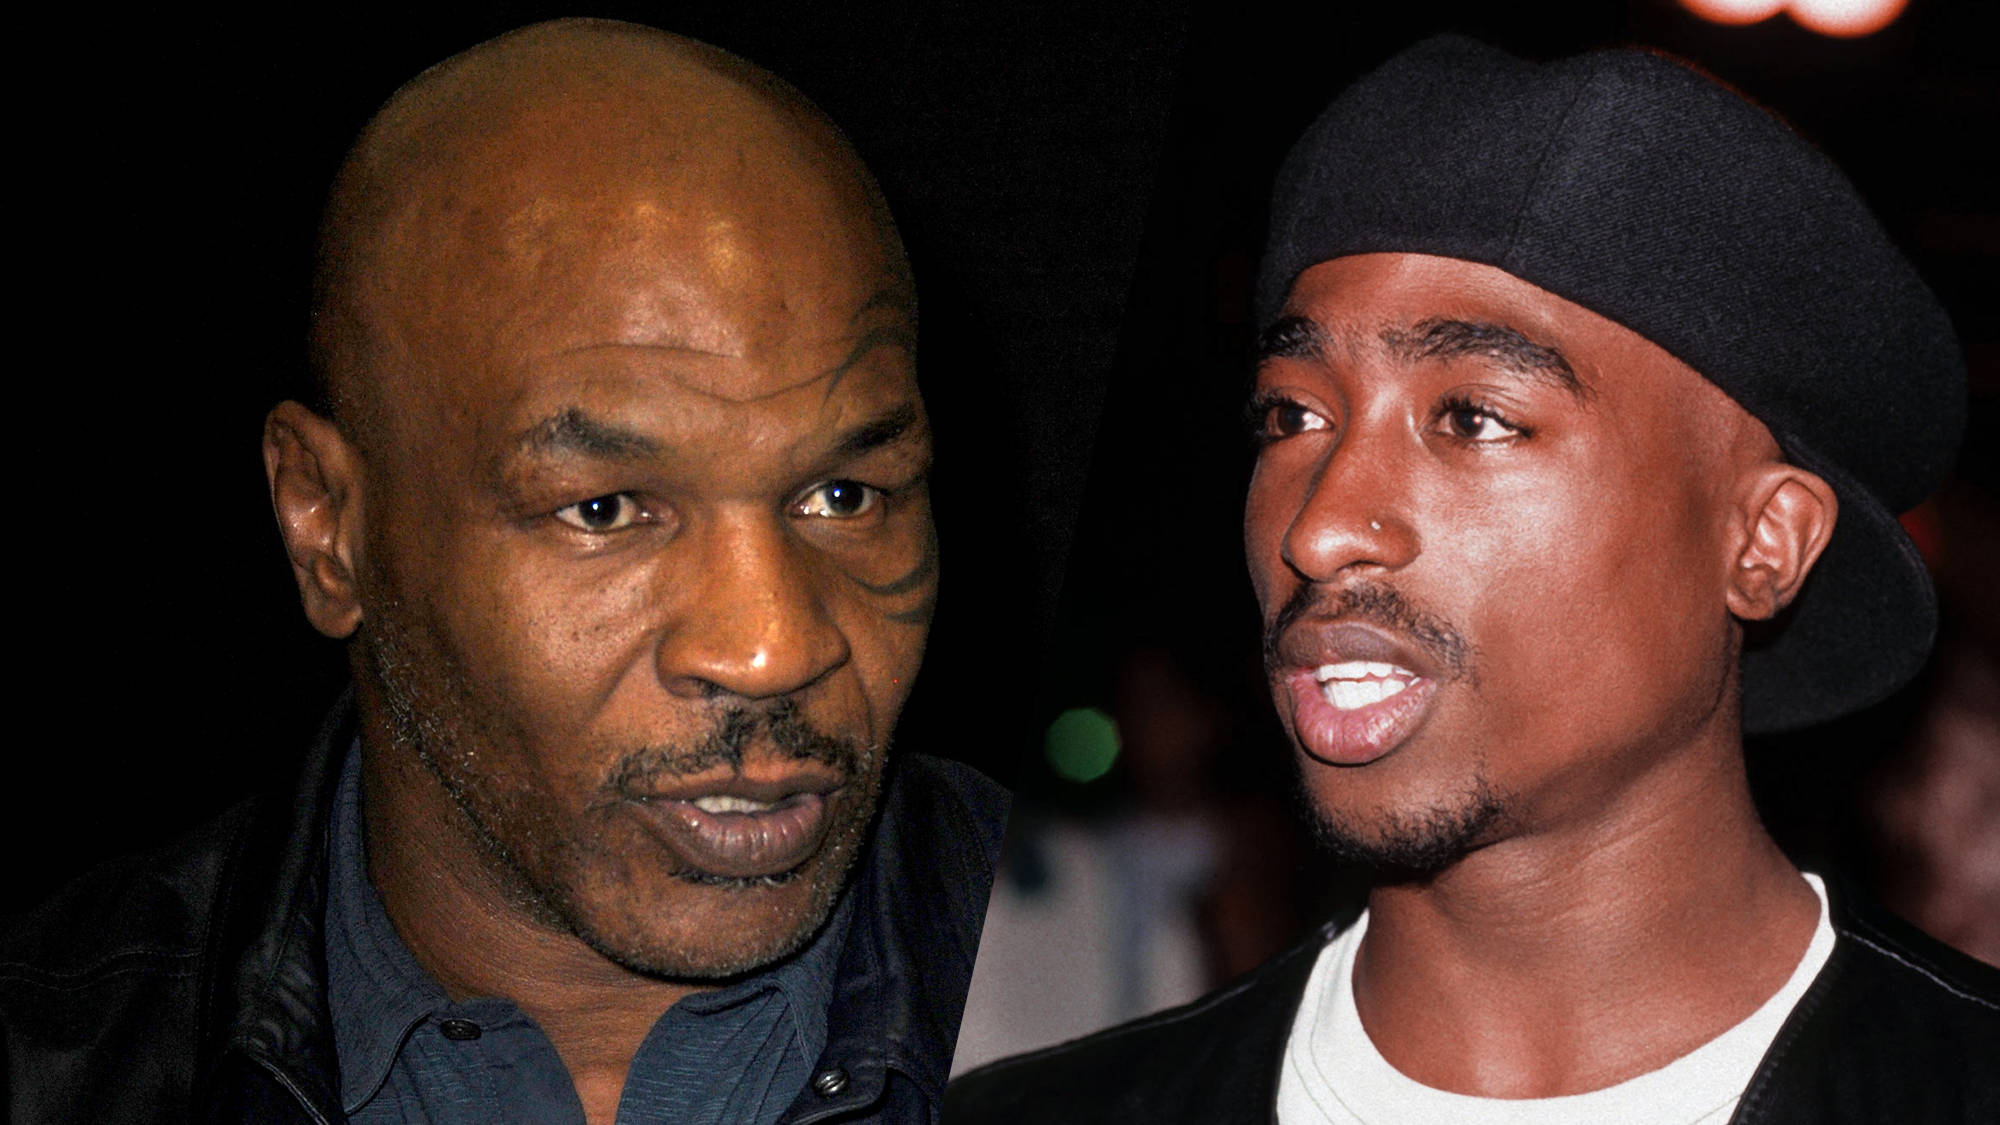 Mike Tyson Tells T.I On “ExpediTIously” That Tupac Was A Bolt Of Energy When He Visited Him In Prison